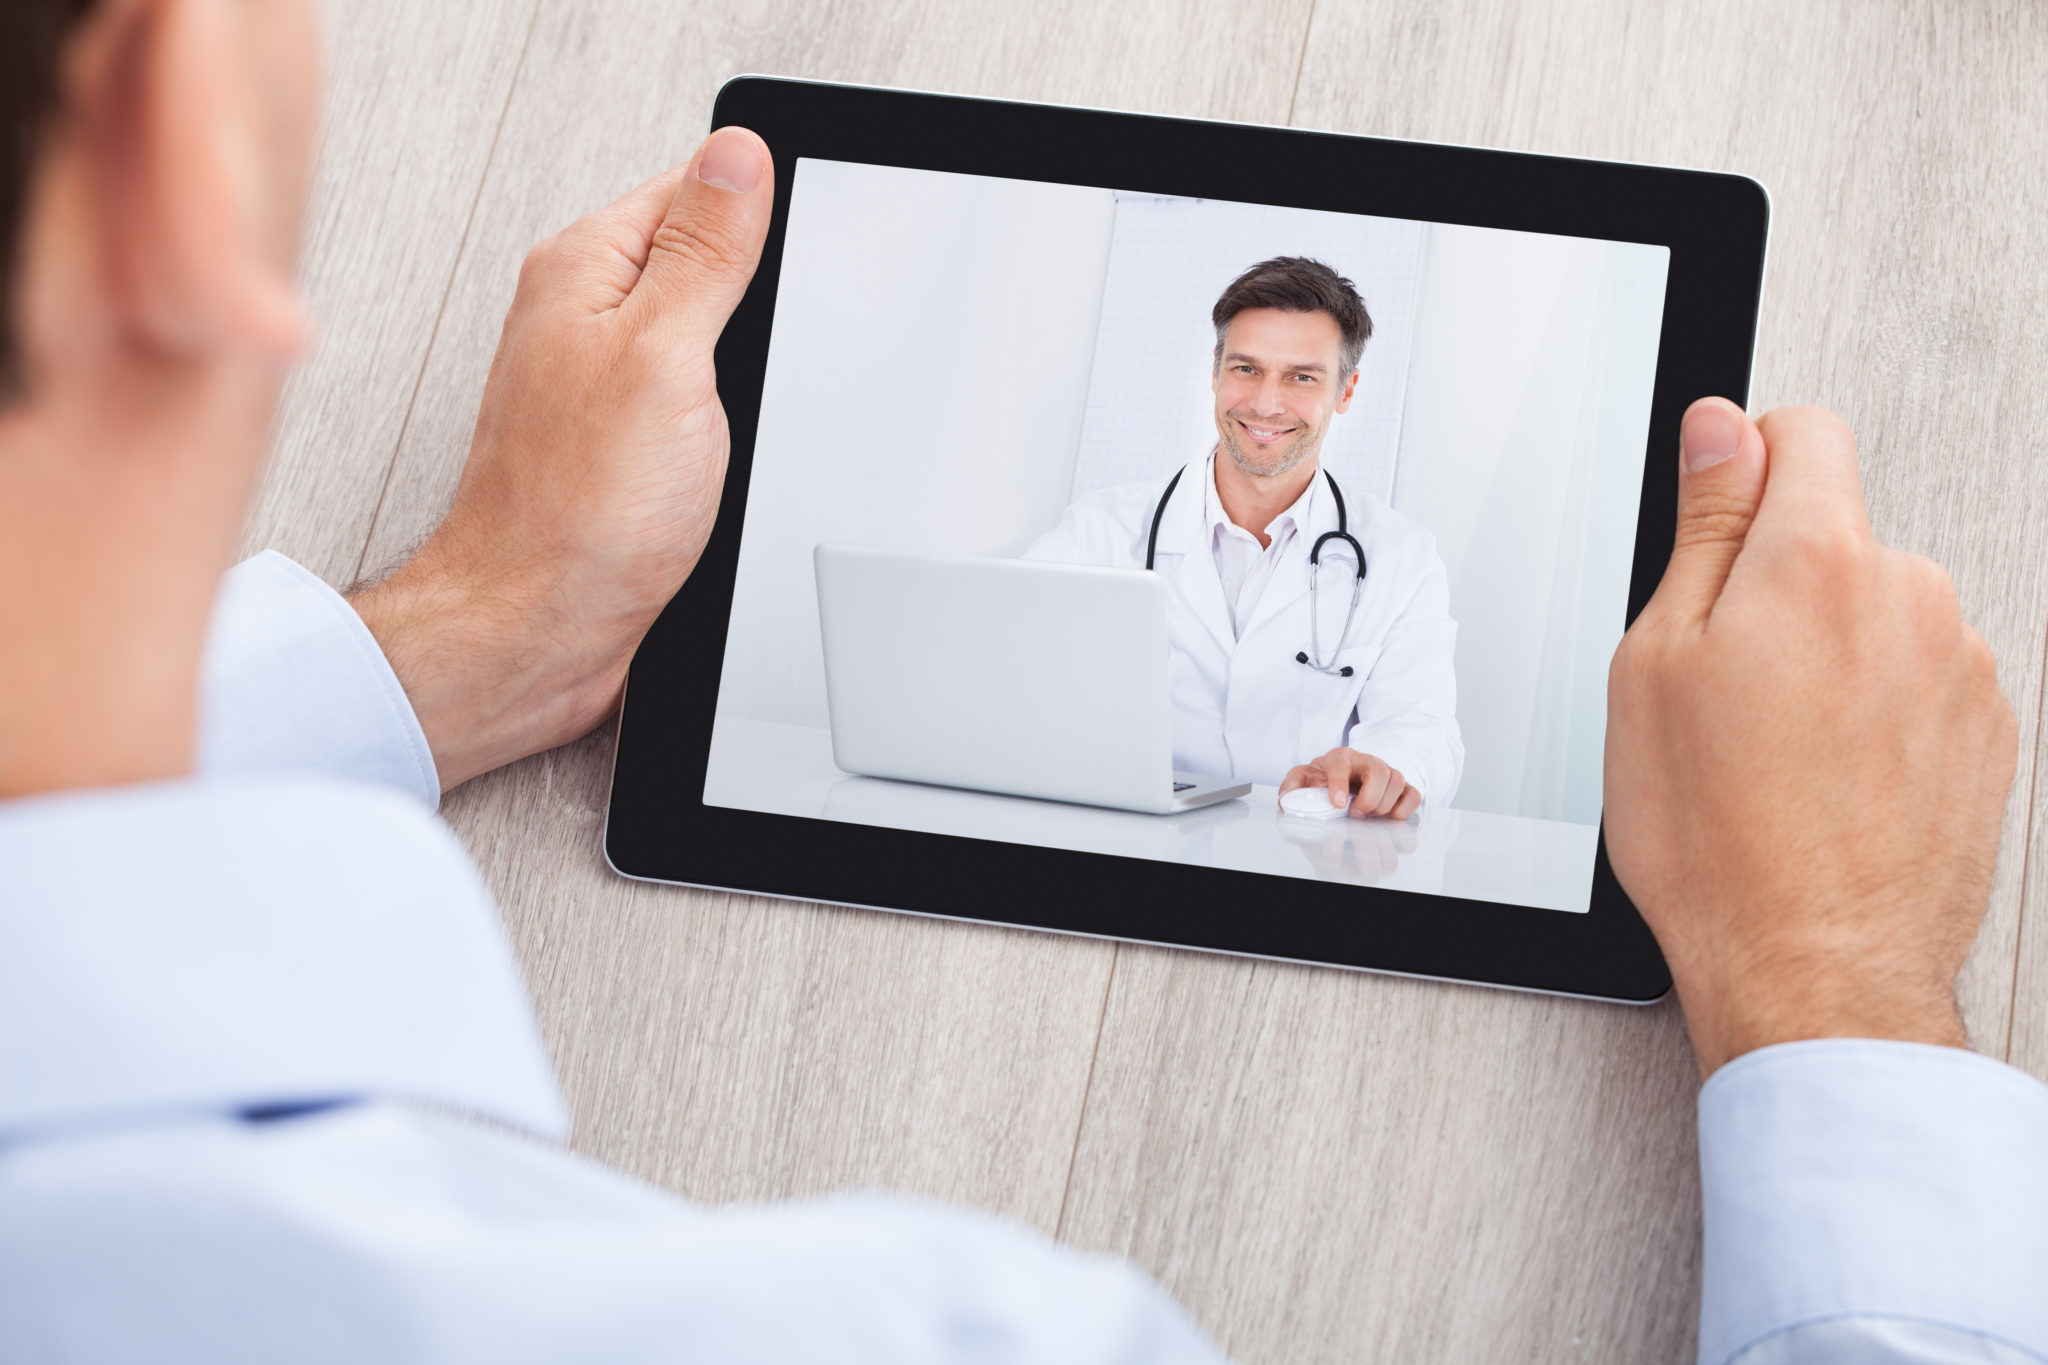 Cropped image of businessman video conferencing with doctor on digital tablet at desk in office